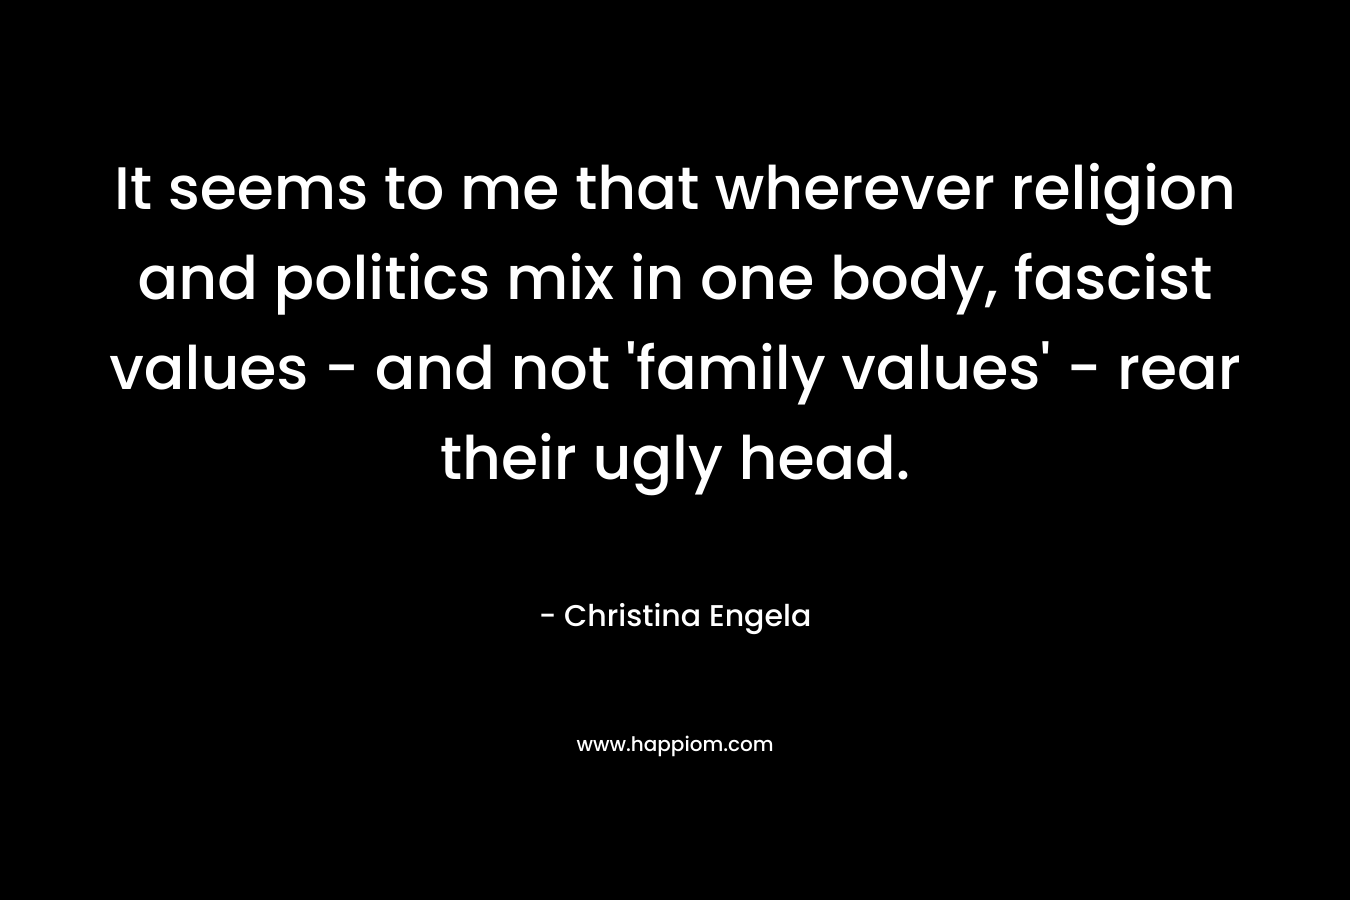 It seems to me that wherever religion and politics mix in one body, fascist values – and not ‘family values’ – rear their ugly head. – Christina Engela